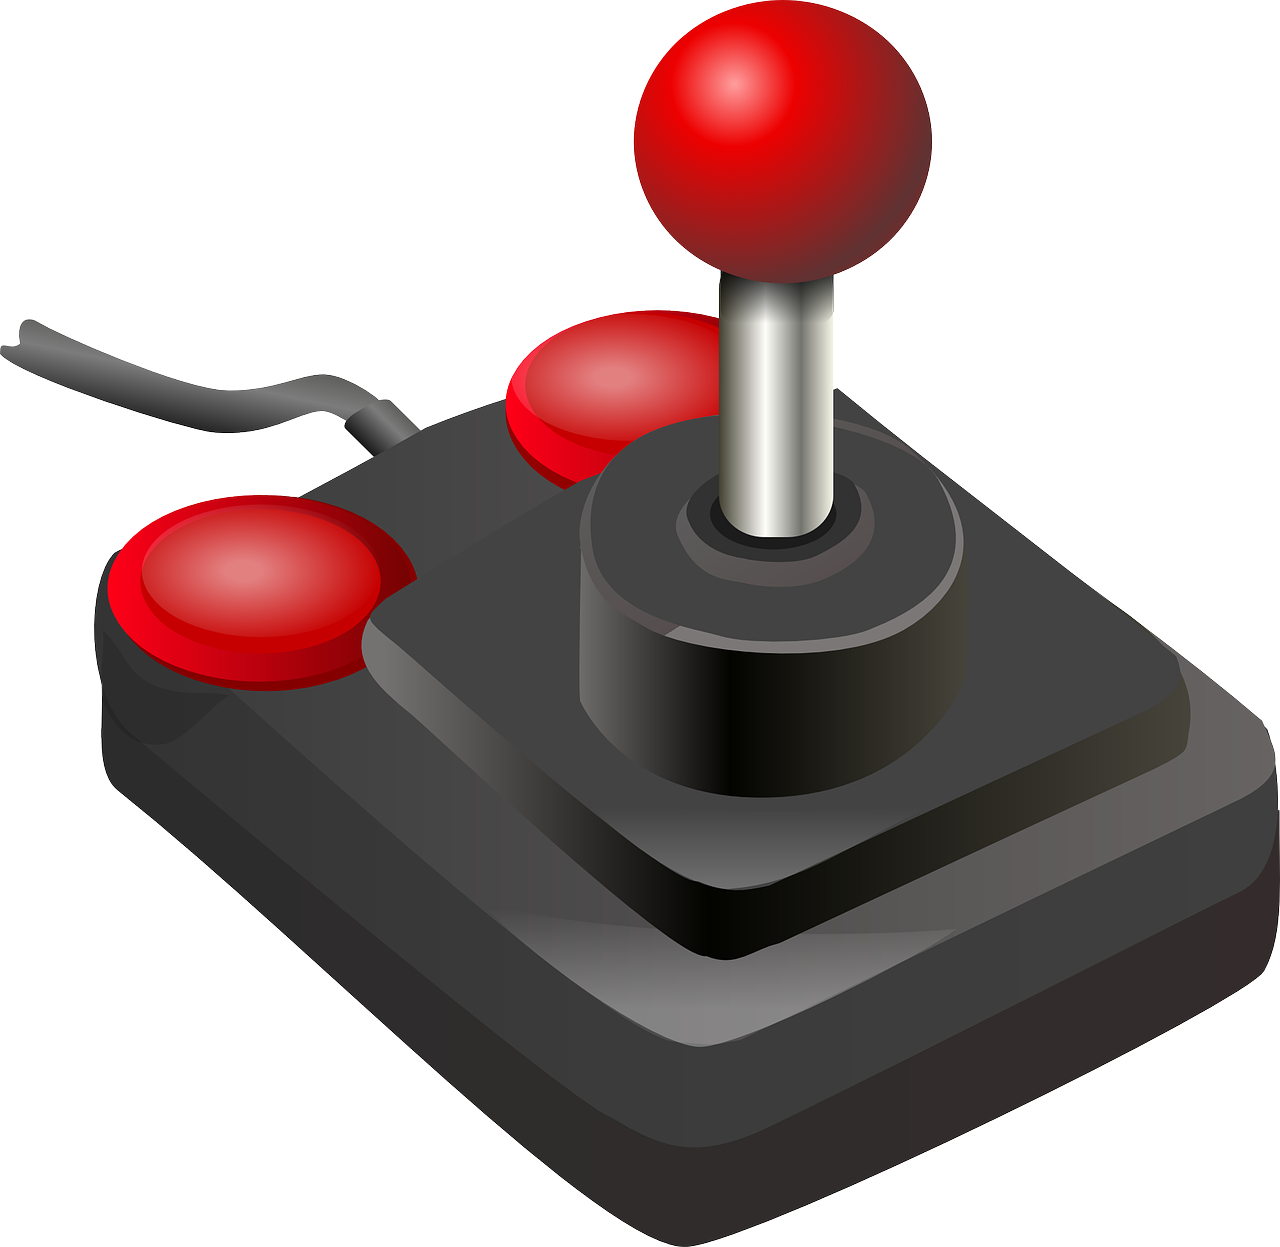 joystick,game controller,buttons,video game,playing,control,retro,amiga,c64,free vector graphics,free pictures, free photos, free images, royalty free, free illustrations, public domain